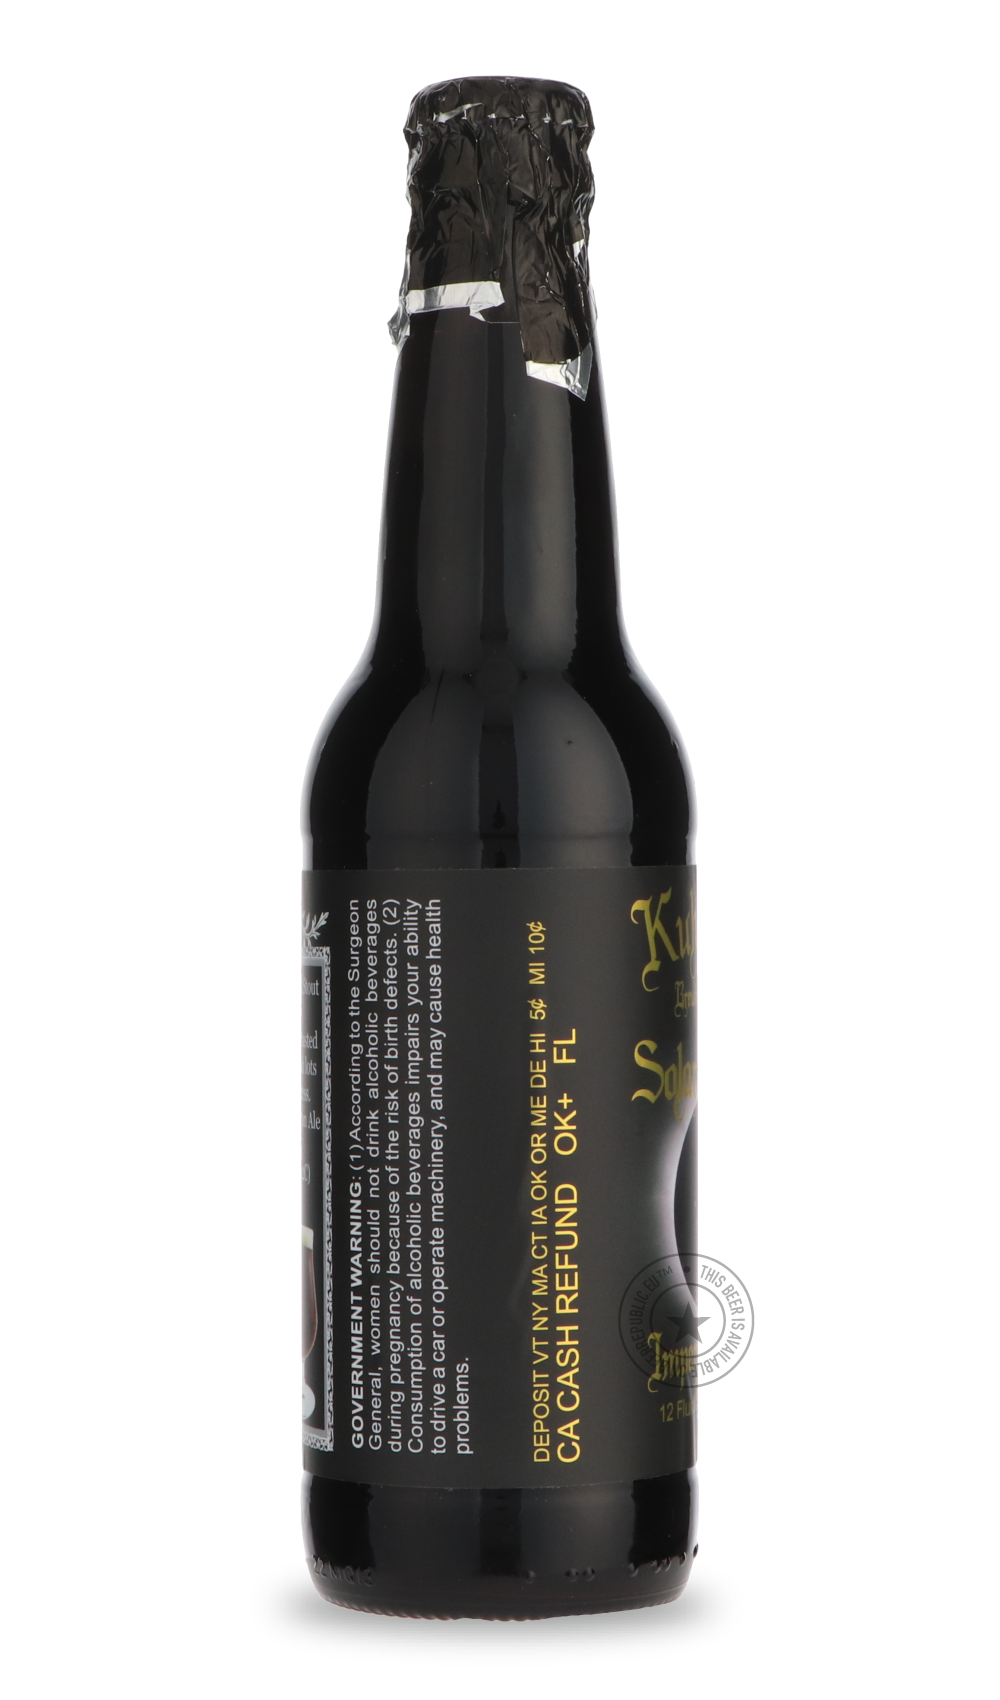 -Kuhnhenn- Solar Eclipse (2022)-Stout & Porter- Only @ Beer Republic - The best online beer store for American & Canadian craft beer - Buy beer online from the USA and Canada - Bier online kopen - Amerikaans bier kopen - Craft beer store - Craft beer kopen - Amerikanisch bier kaufen - Bier online kaufen - Acheter biere online - IPA - Stout - Porter - New England IPA - Hazy IPA - Imperial Stout - Barrel Aged - Barrel Aged Imperial Stout - Brown - Dark beer - Blond - Blonde - Pilsner - Lager - Wheat - Weizen 